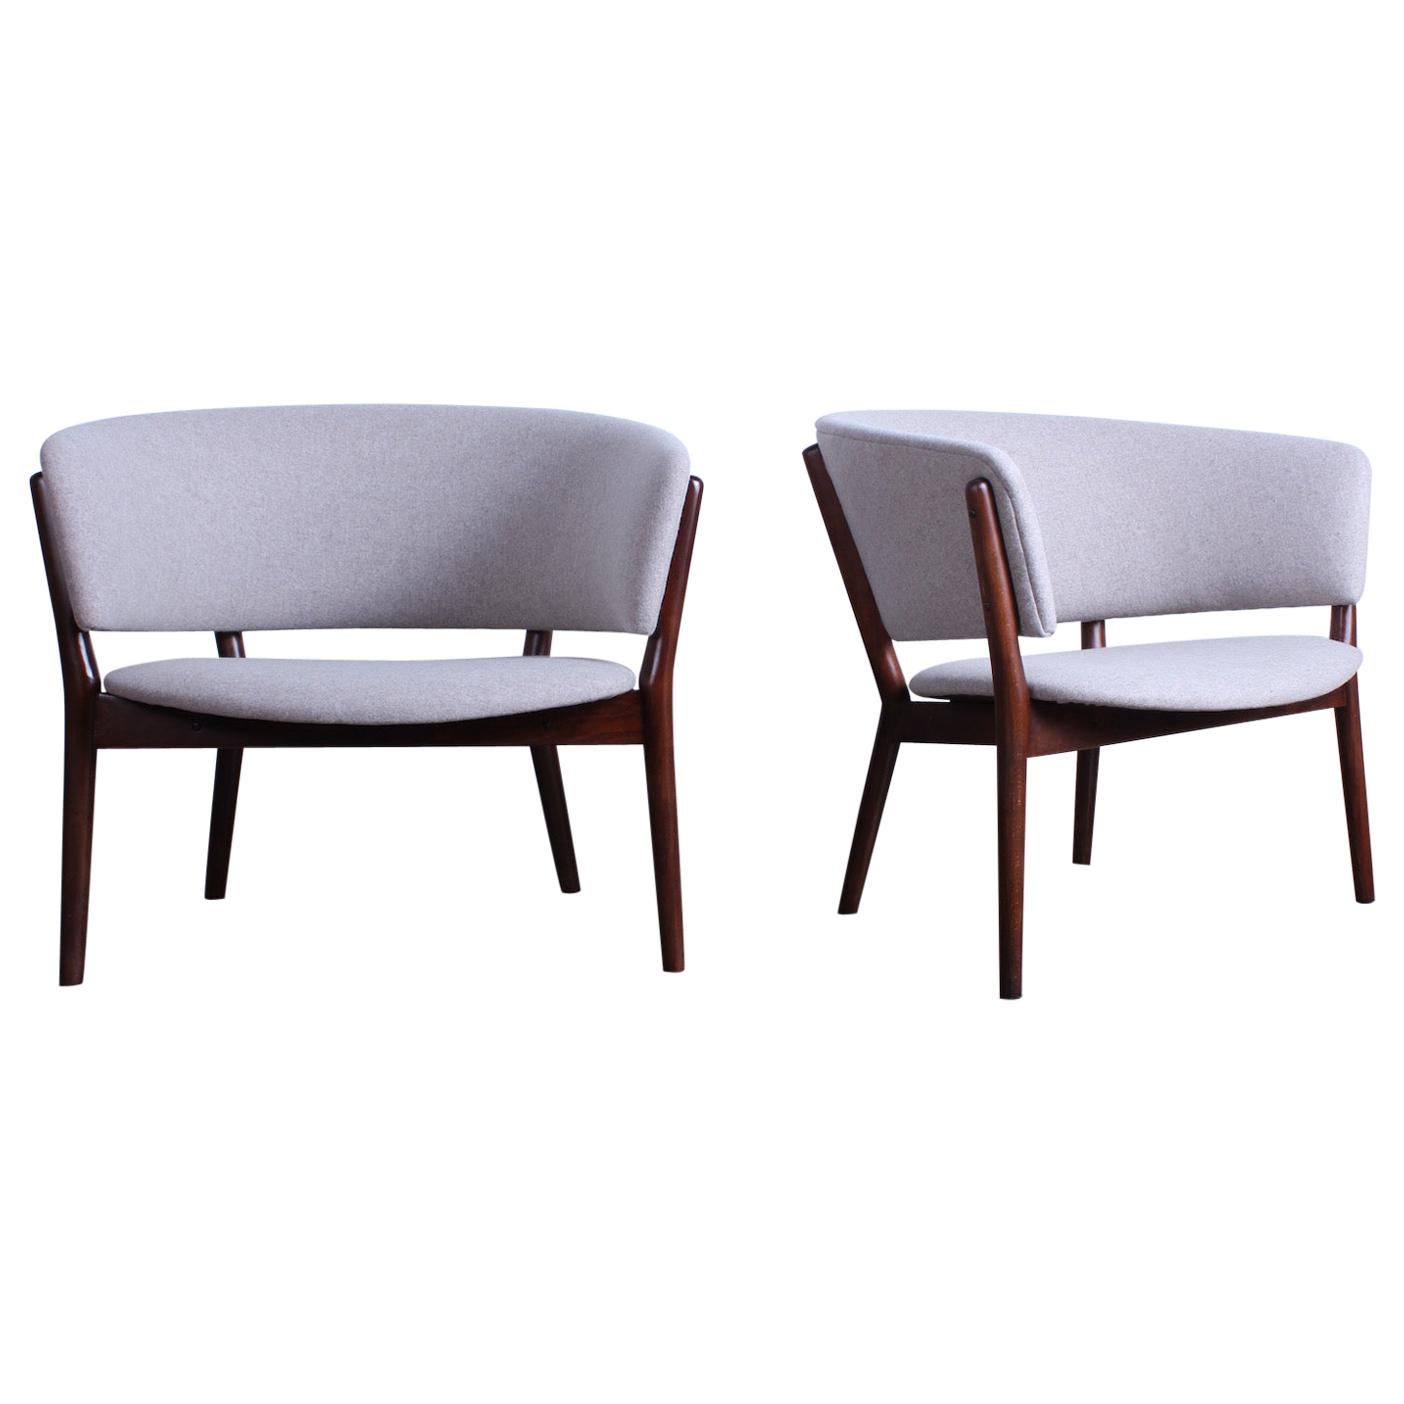 Pair of Lounge Chairs by Nanna Ditzel